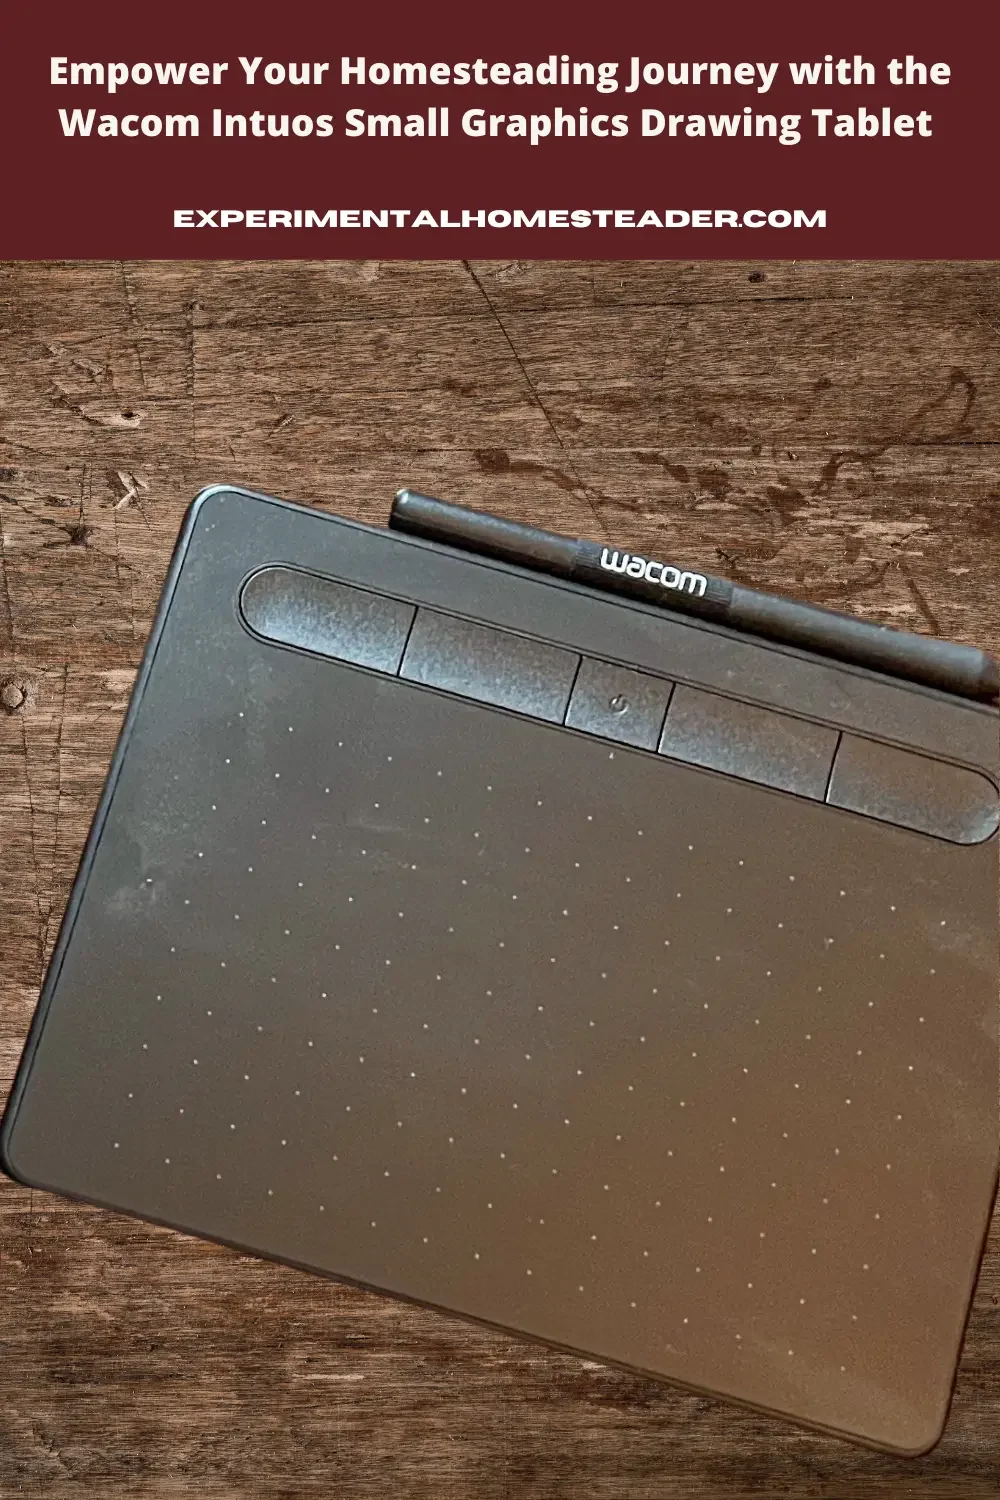 An image of the Wacom Intuos Small Graphics Drawing Tablet